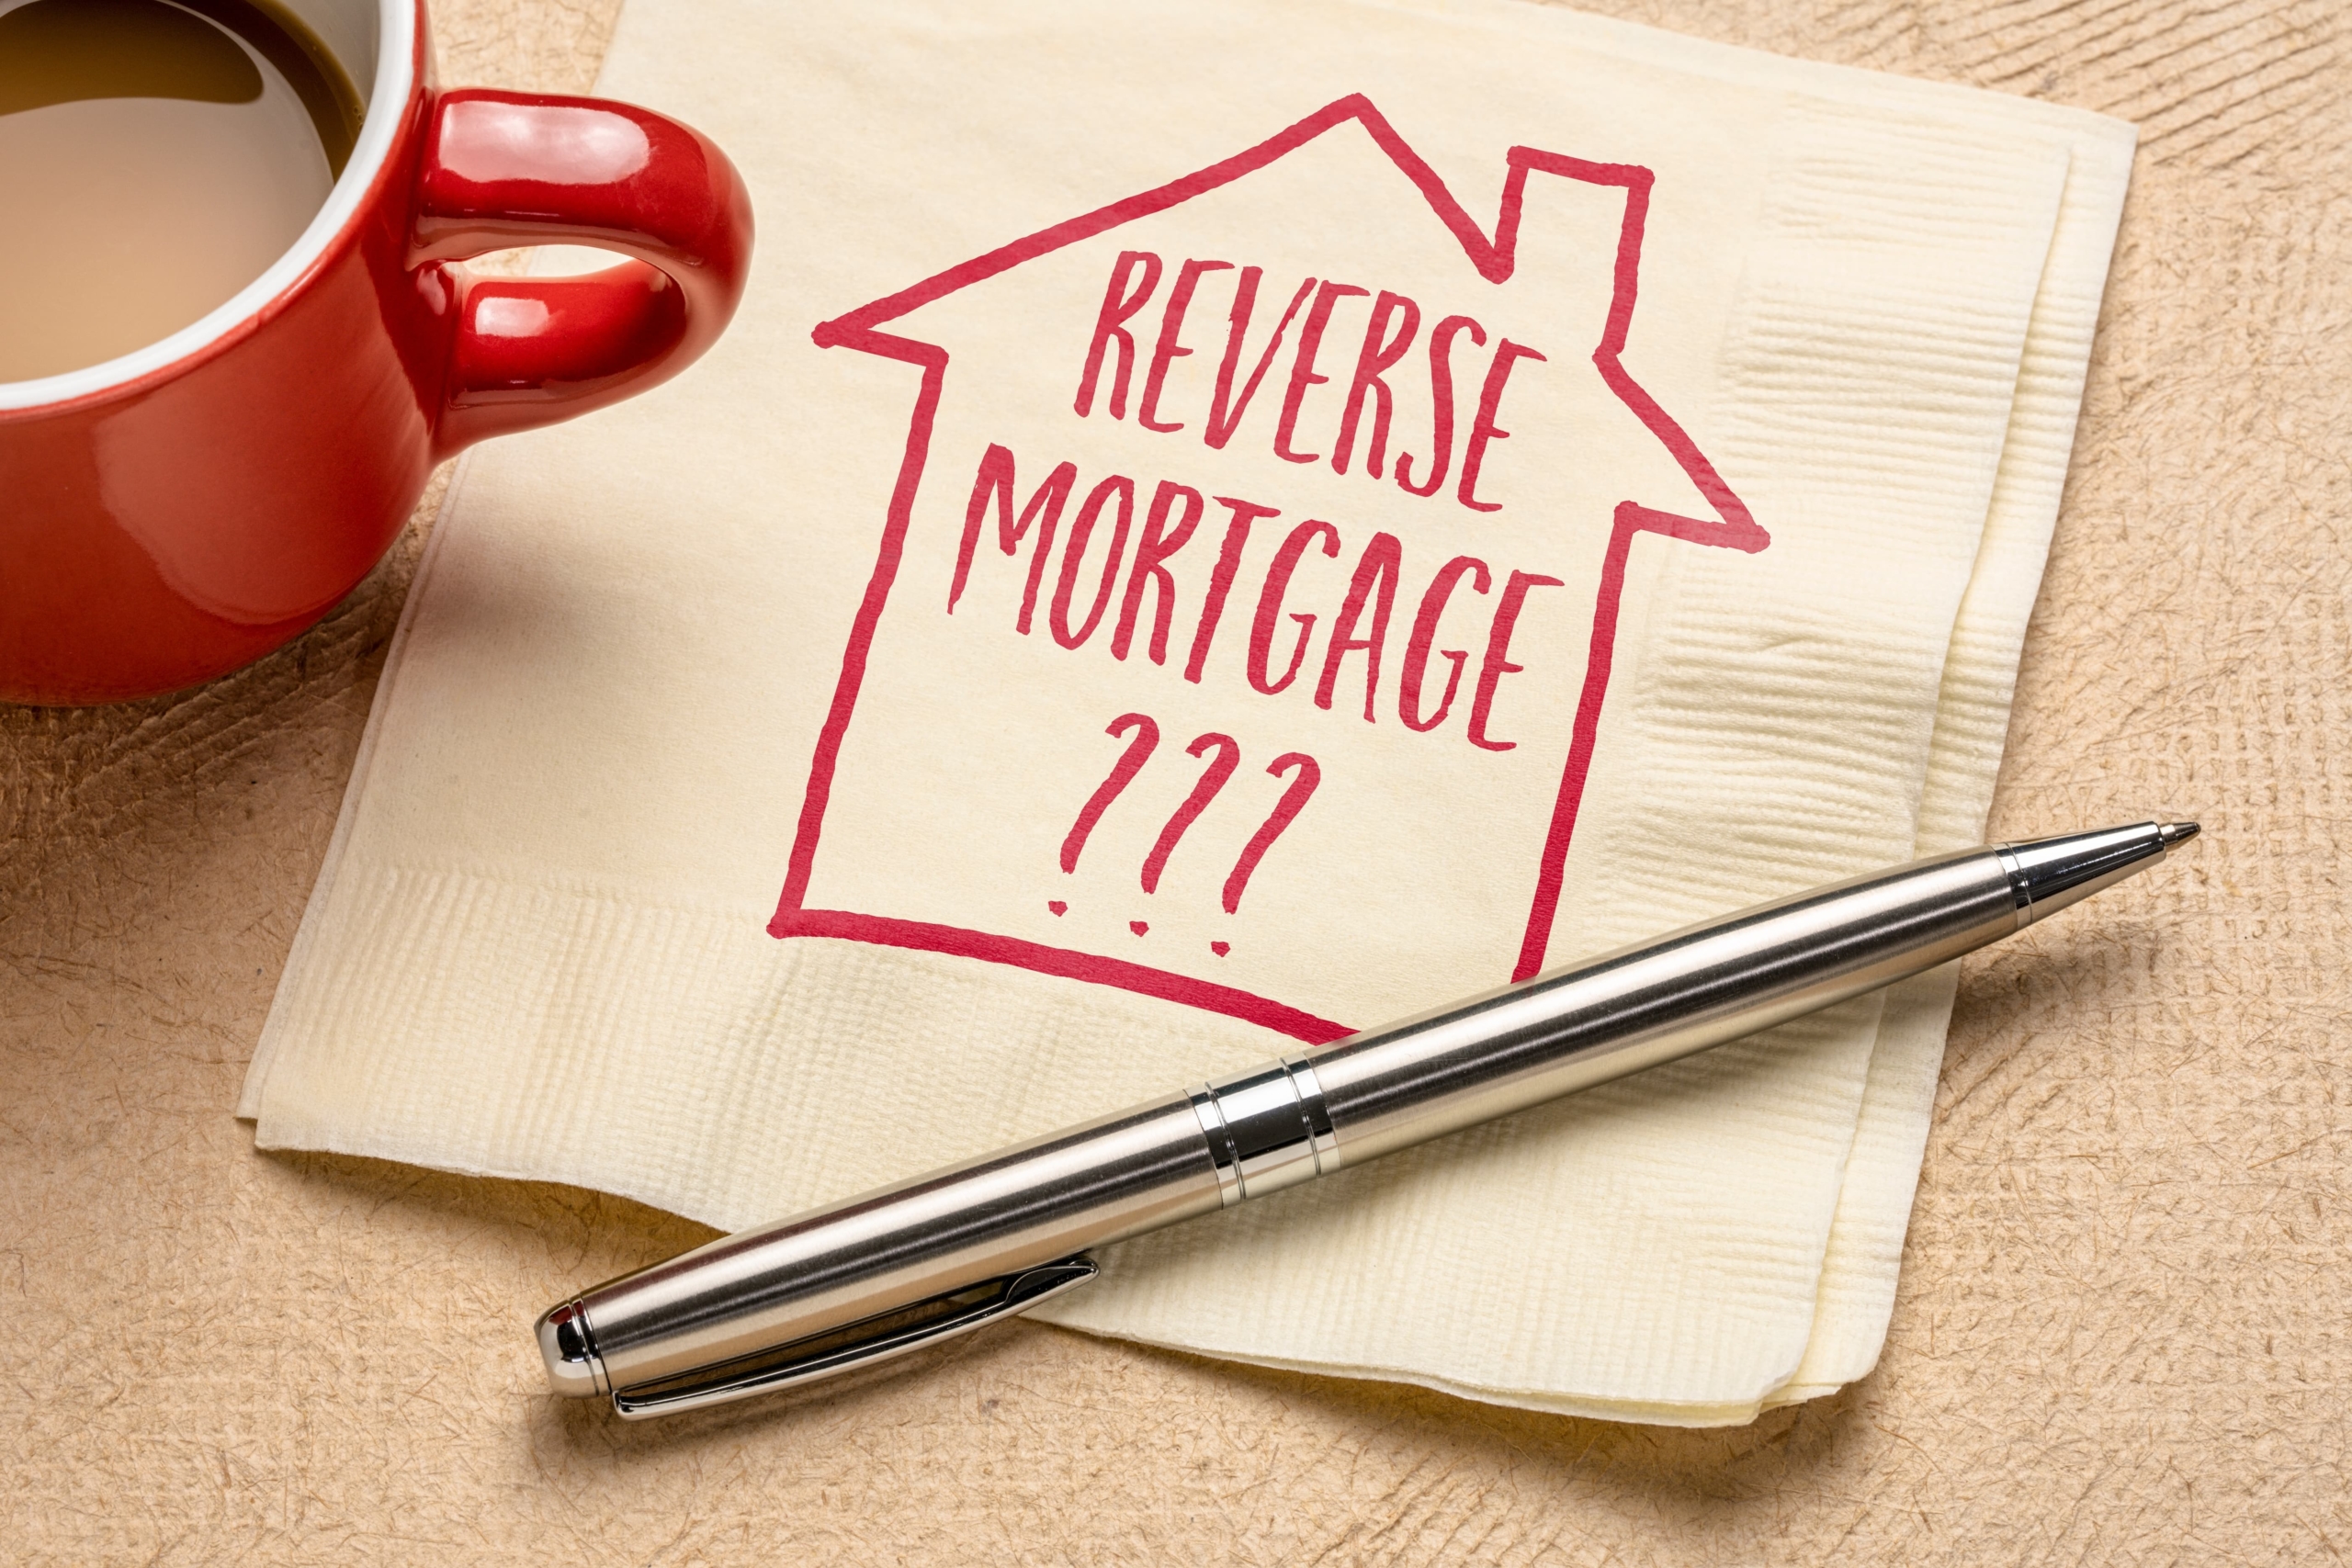 reverse mortgage question - writing and sketch on a napkin